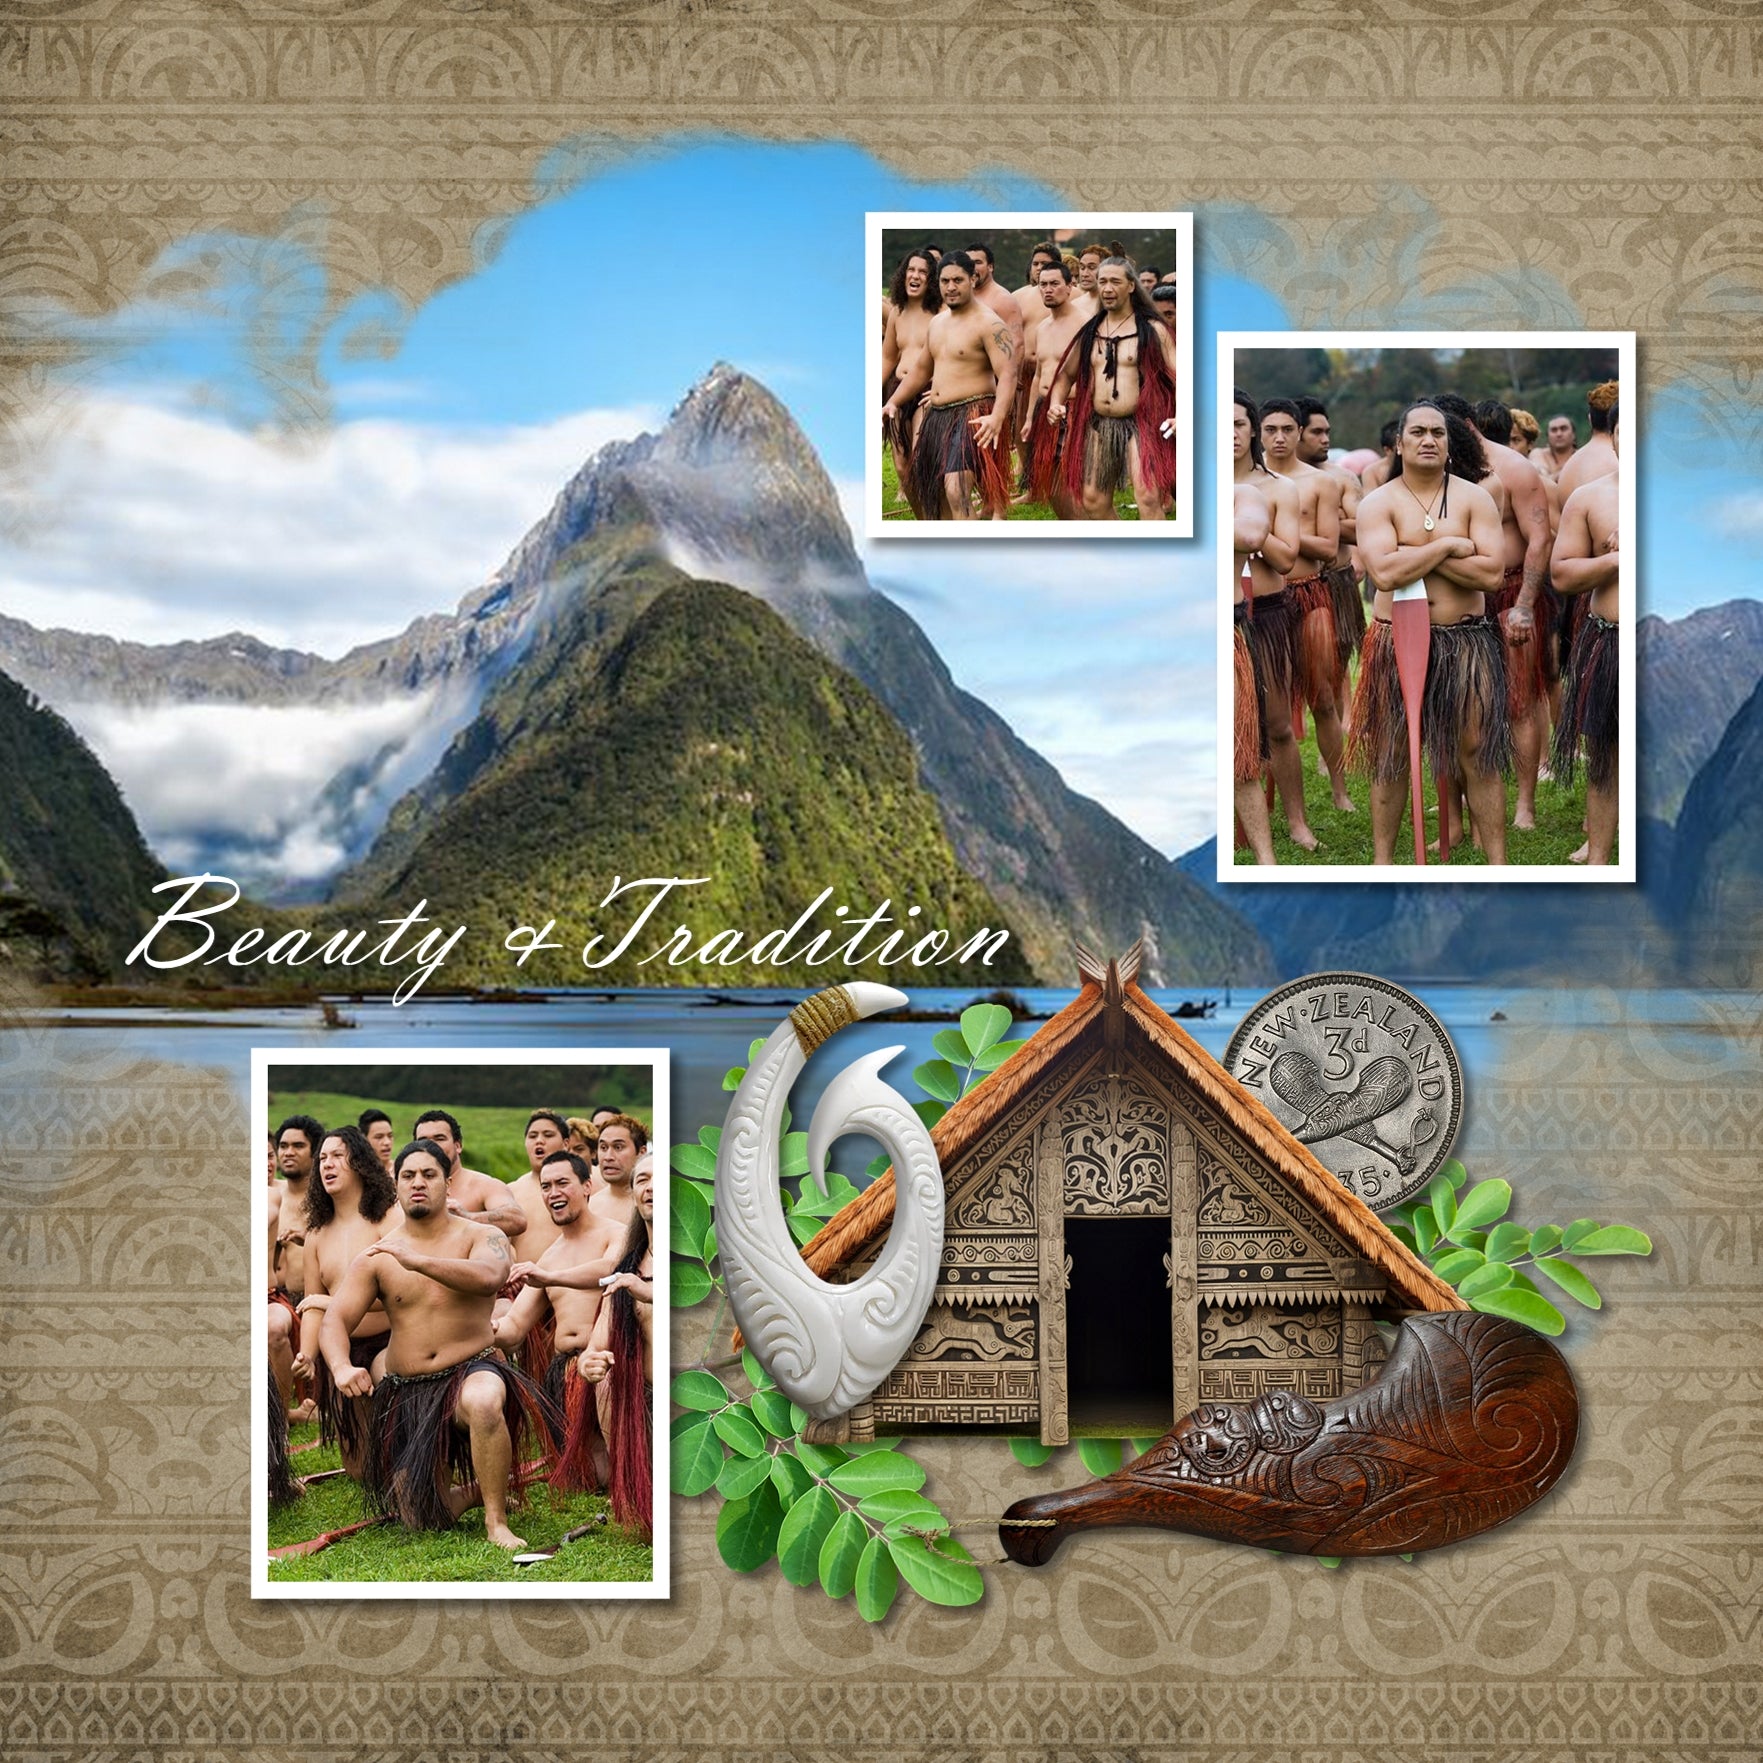 Highlight your vacation memories with these digital art tribal and Aboriginal patterned overlays by Lucky Girl Creative. Great for digital scrapbooking holidays to New Zealand and Australia and exploring indigenous life throughout Polynesia! Fill with your favorite color, photo, or paper to create a unique effect.